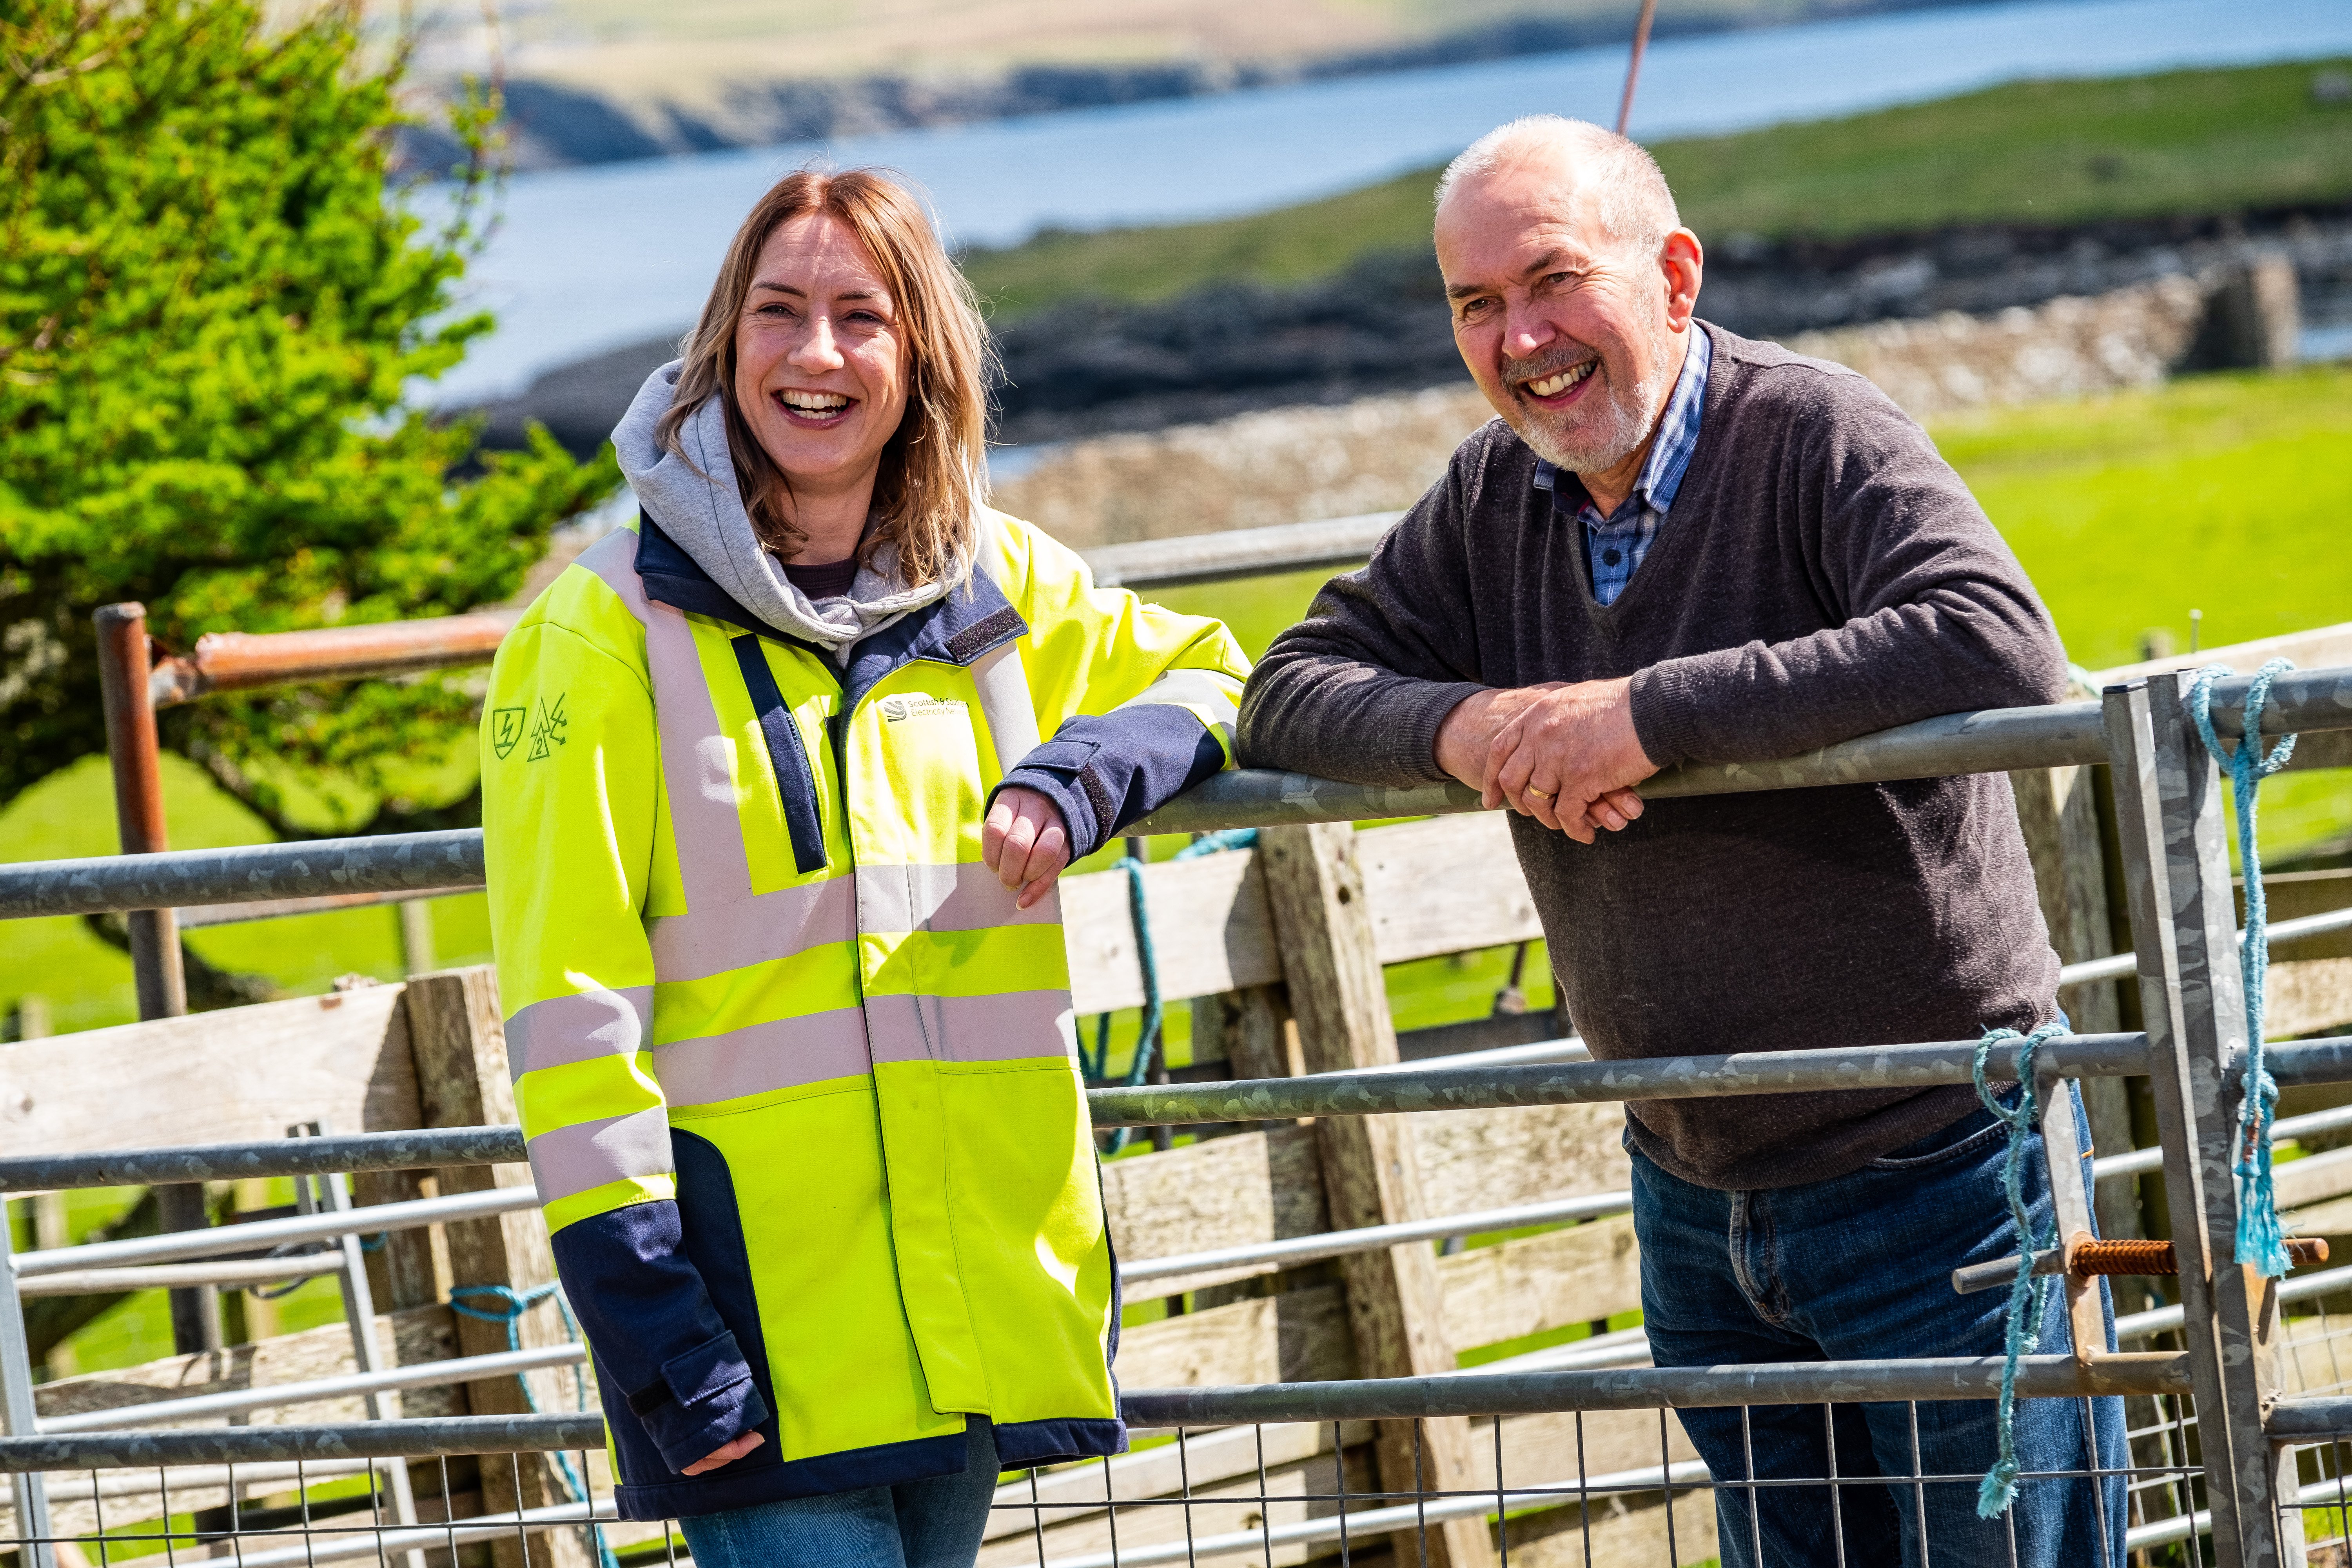 A member of our Communities team meets with a member of the local Shetland community to discuss works happening in the area. The photograph captures SSEN Transmission's community spirit.